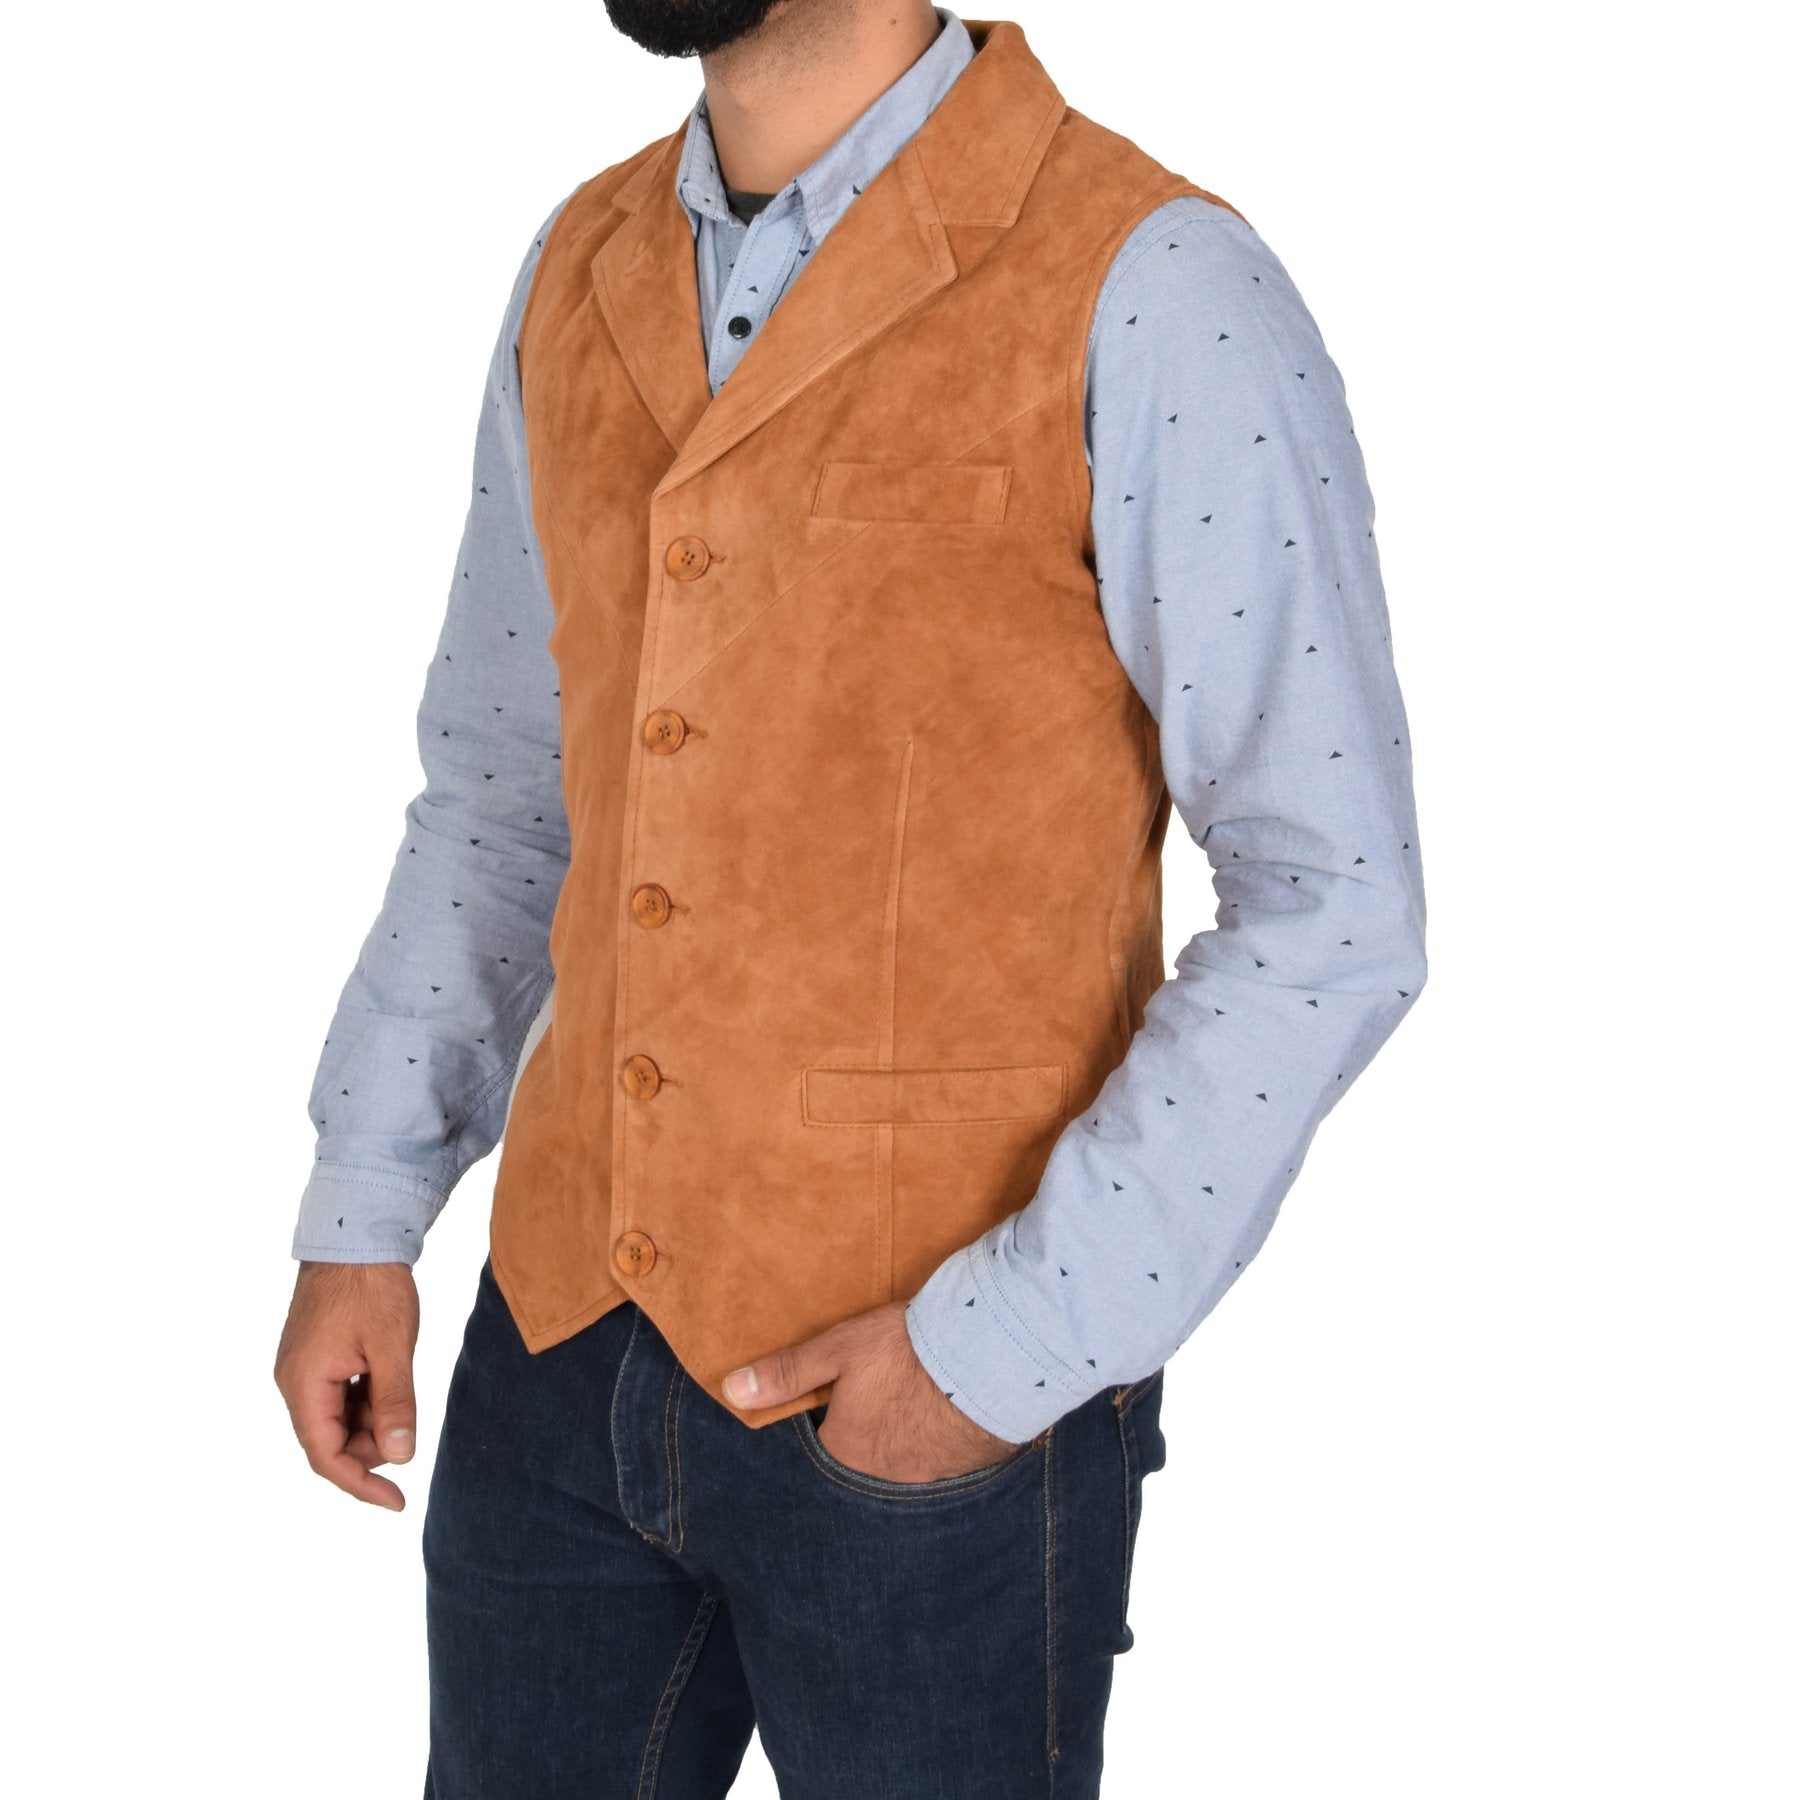 Spine Spark Men's Tan Soft Suede Leather Classic Style Vest